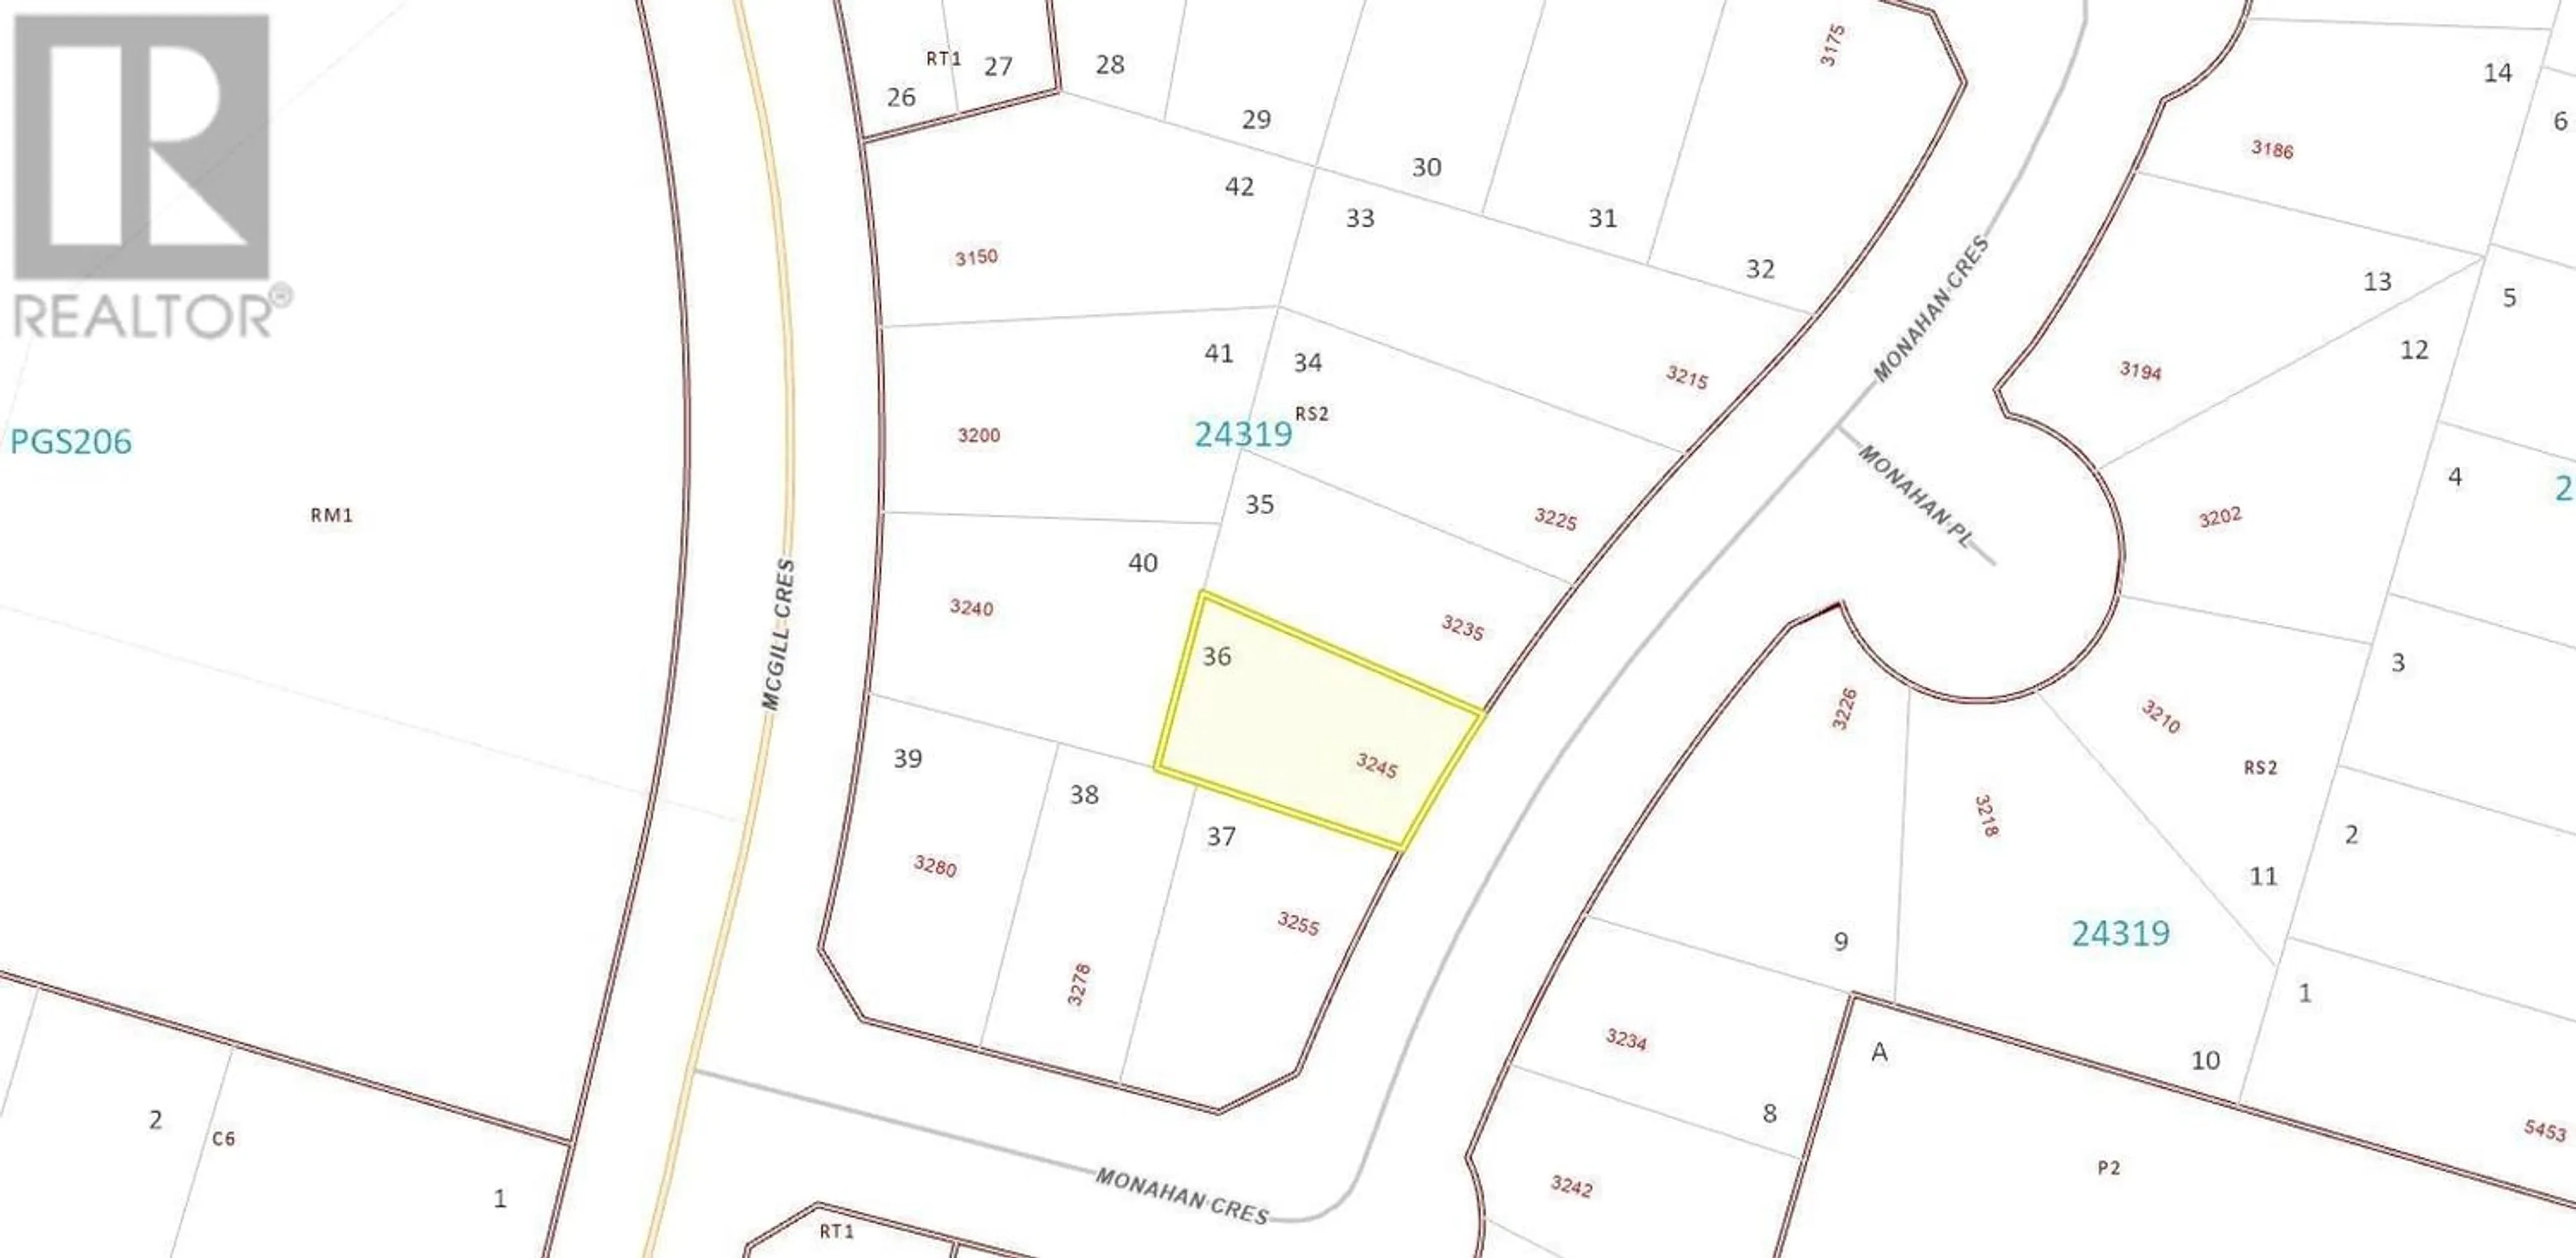 Picture of a map for 3245 MONAHAN CRESCENT, Prince George British Columbia V2N4E4